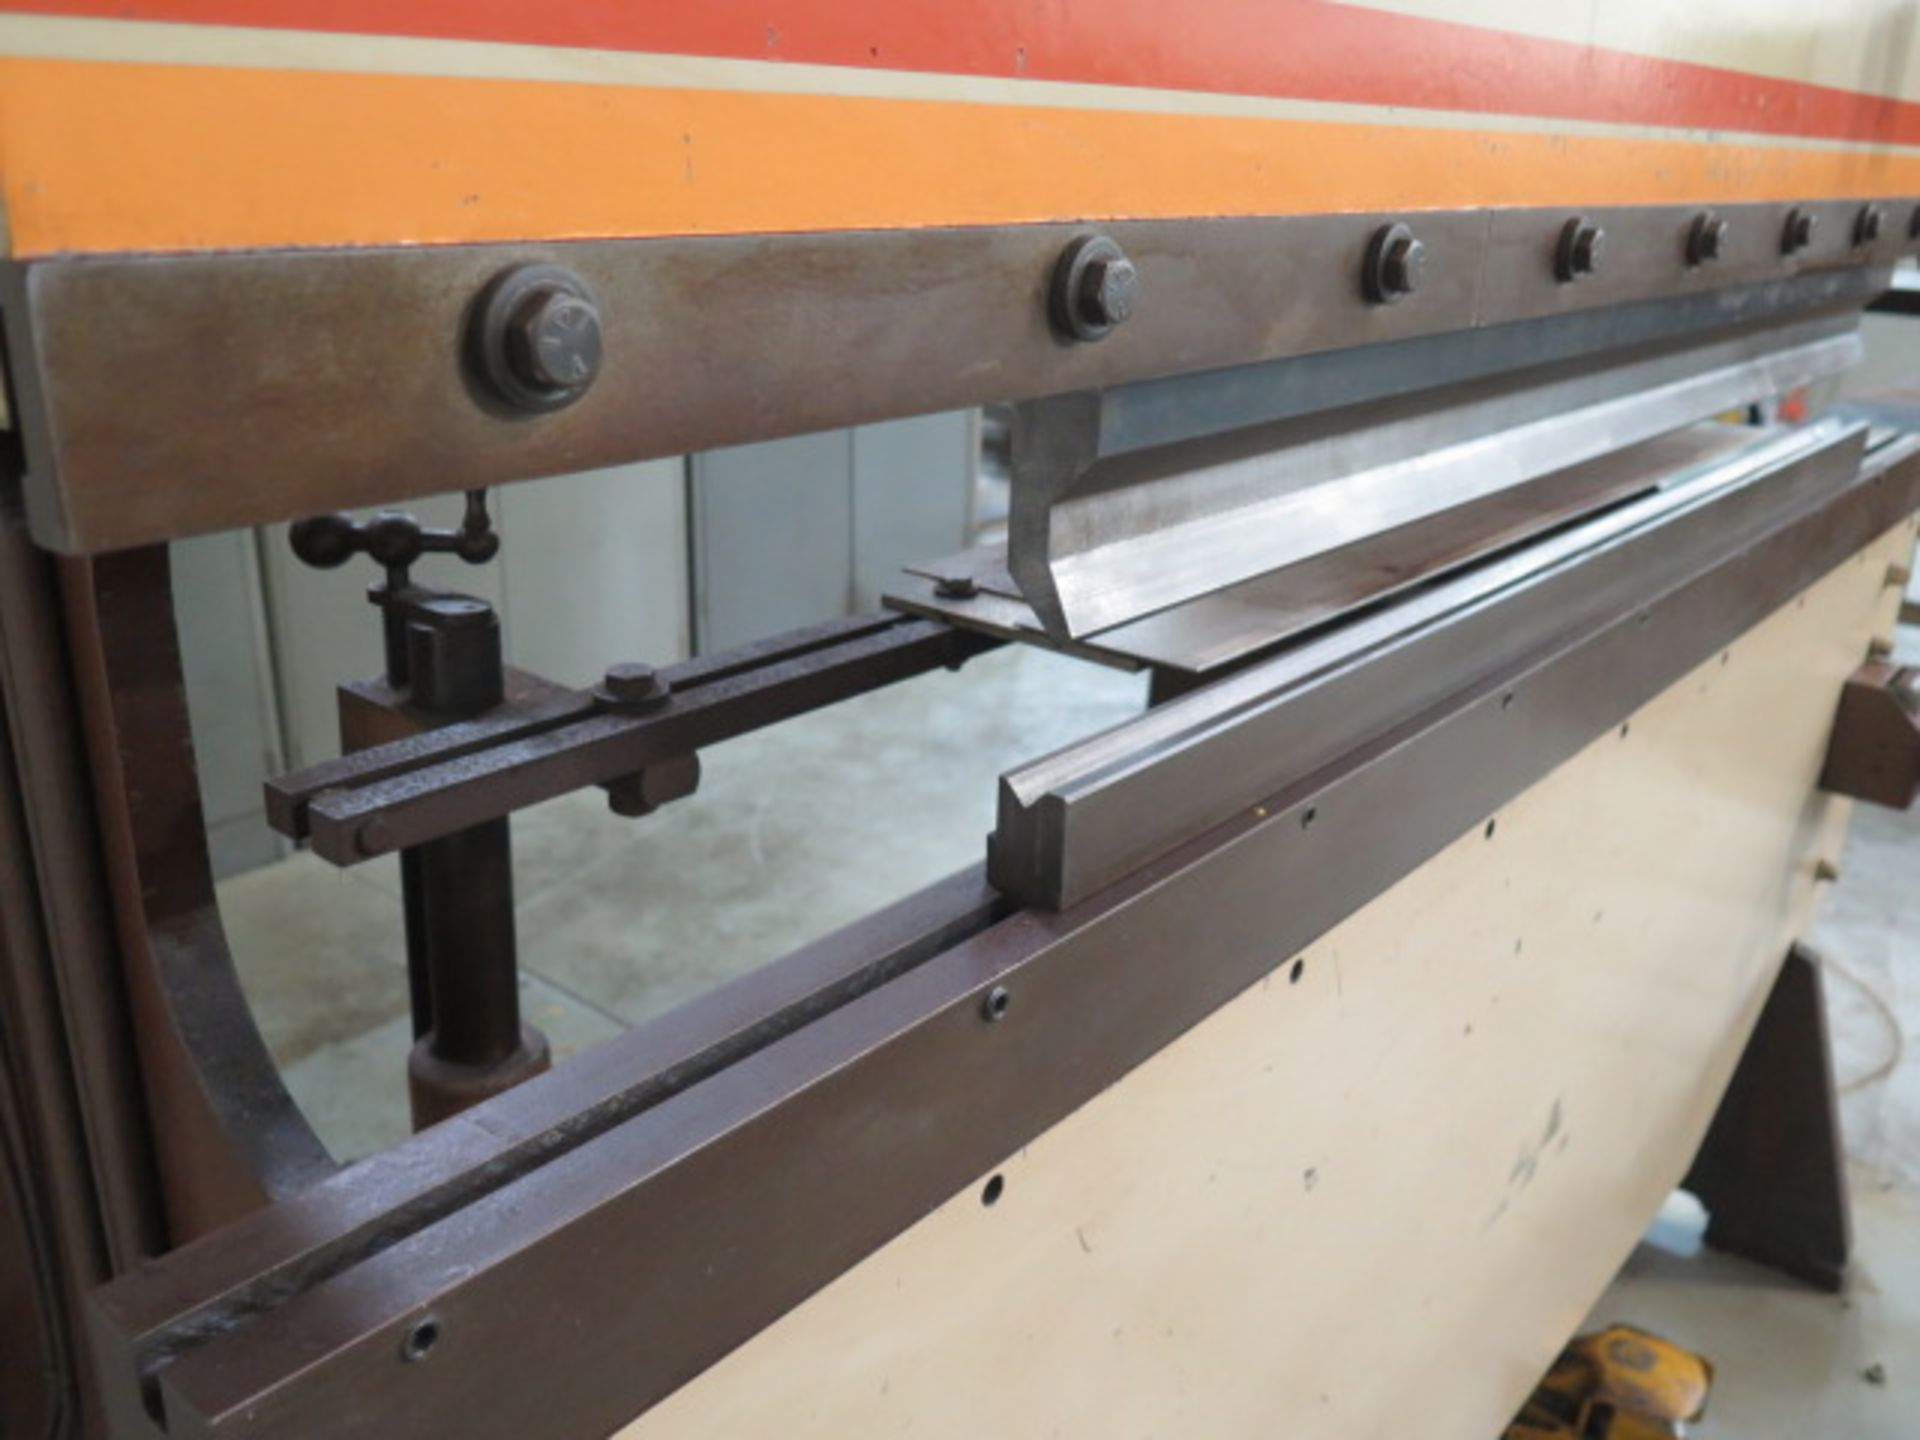 DiAcro 4-7272” Press Brake w/ Dial Back Gage, 72” Length, This Item is Sold AS IS and NO Warranty. - Image 5 of 10